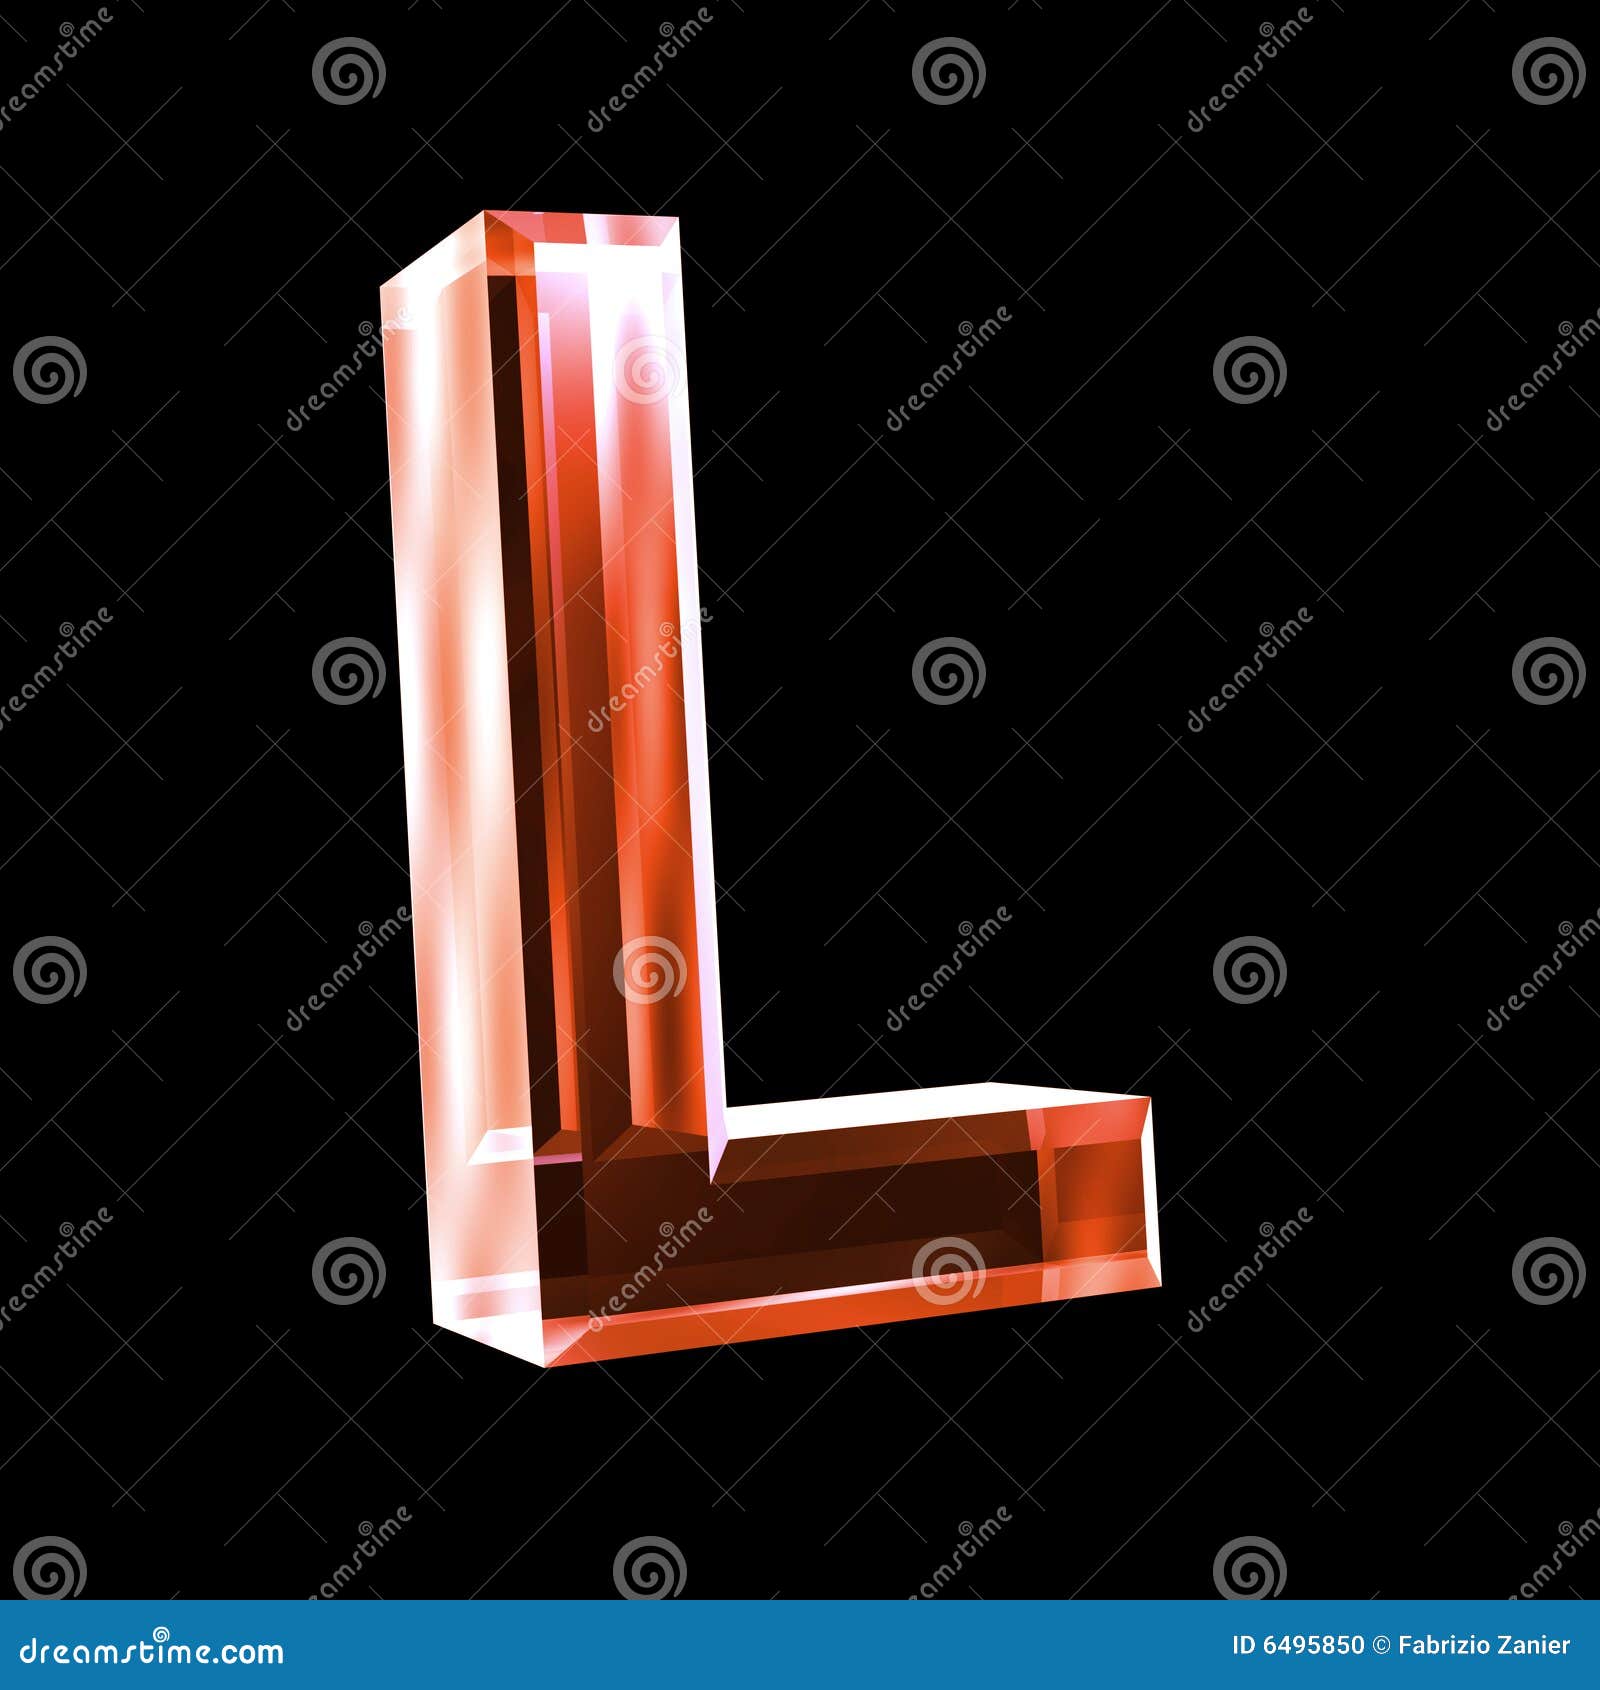 Letter L In Red Glass 3D Stock Photo - Image: 6495850